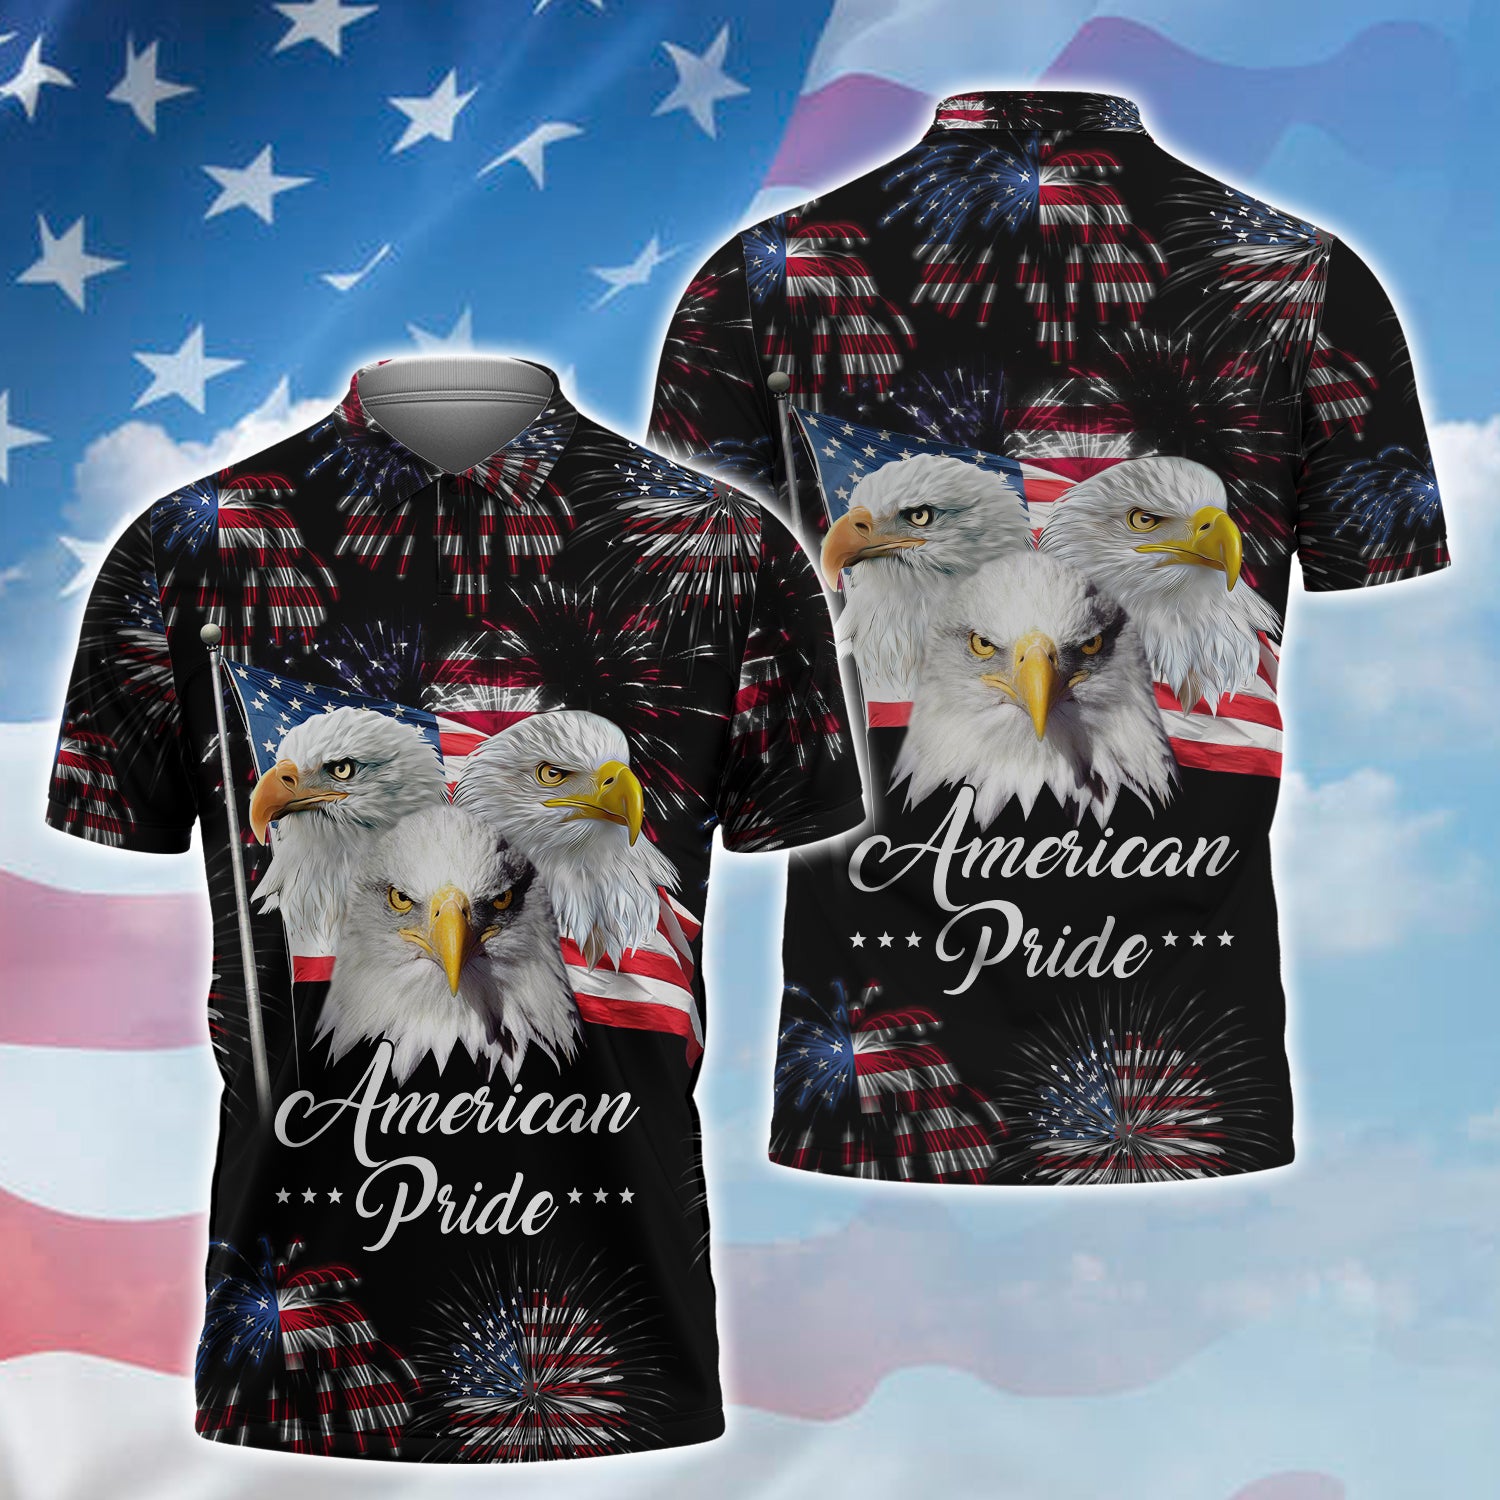 Eagle American Pride - Independence Day Is Coming - 3D Full Print Tad 495